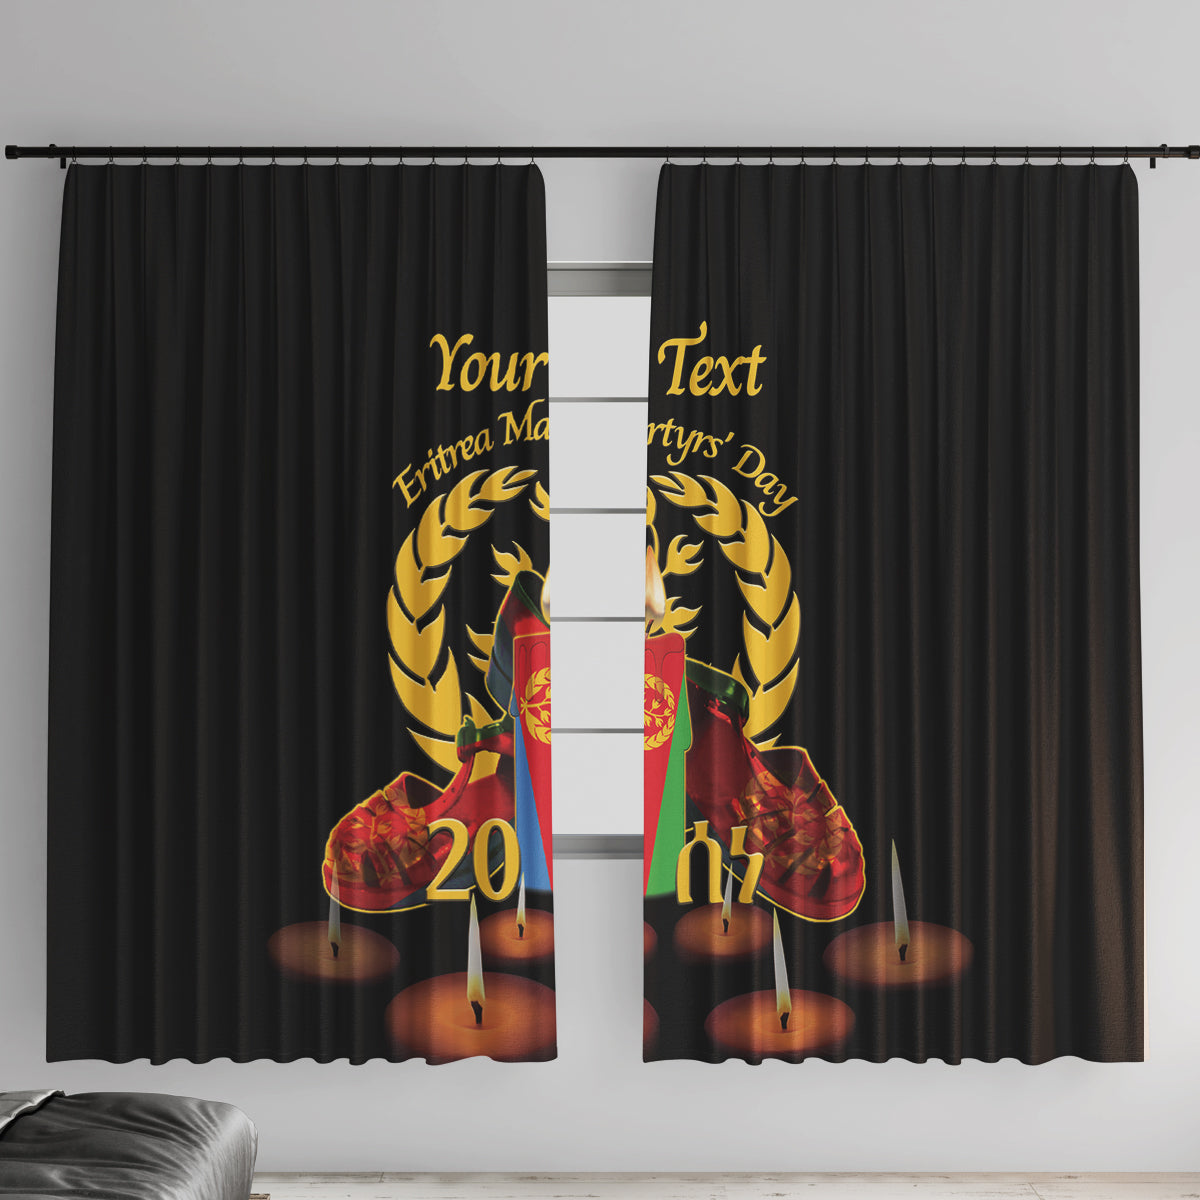 Custom Eritrea Martyrs' Day Window Curtain 20 June Shida Shoes With Candles - Black